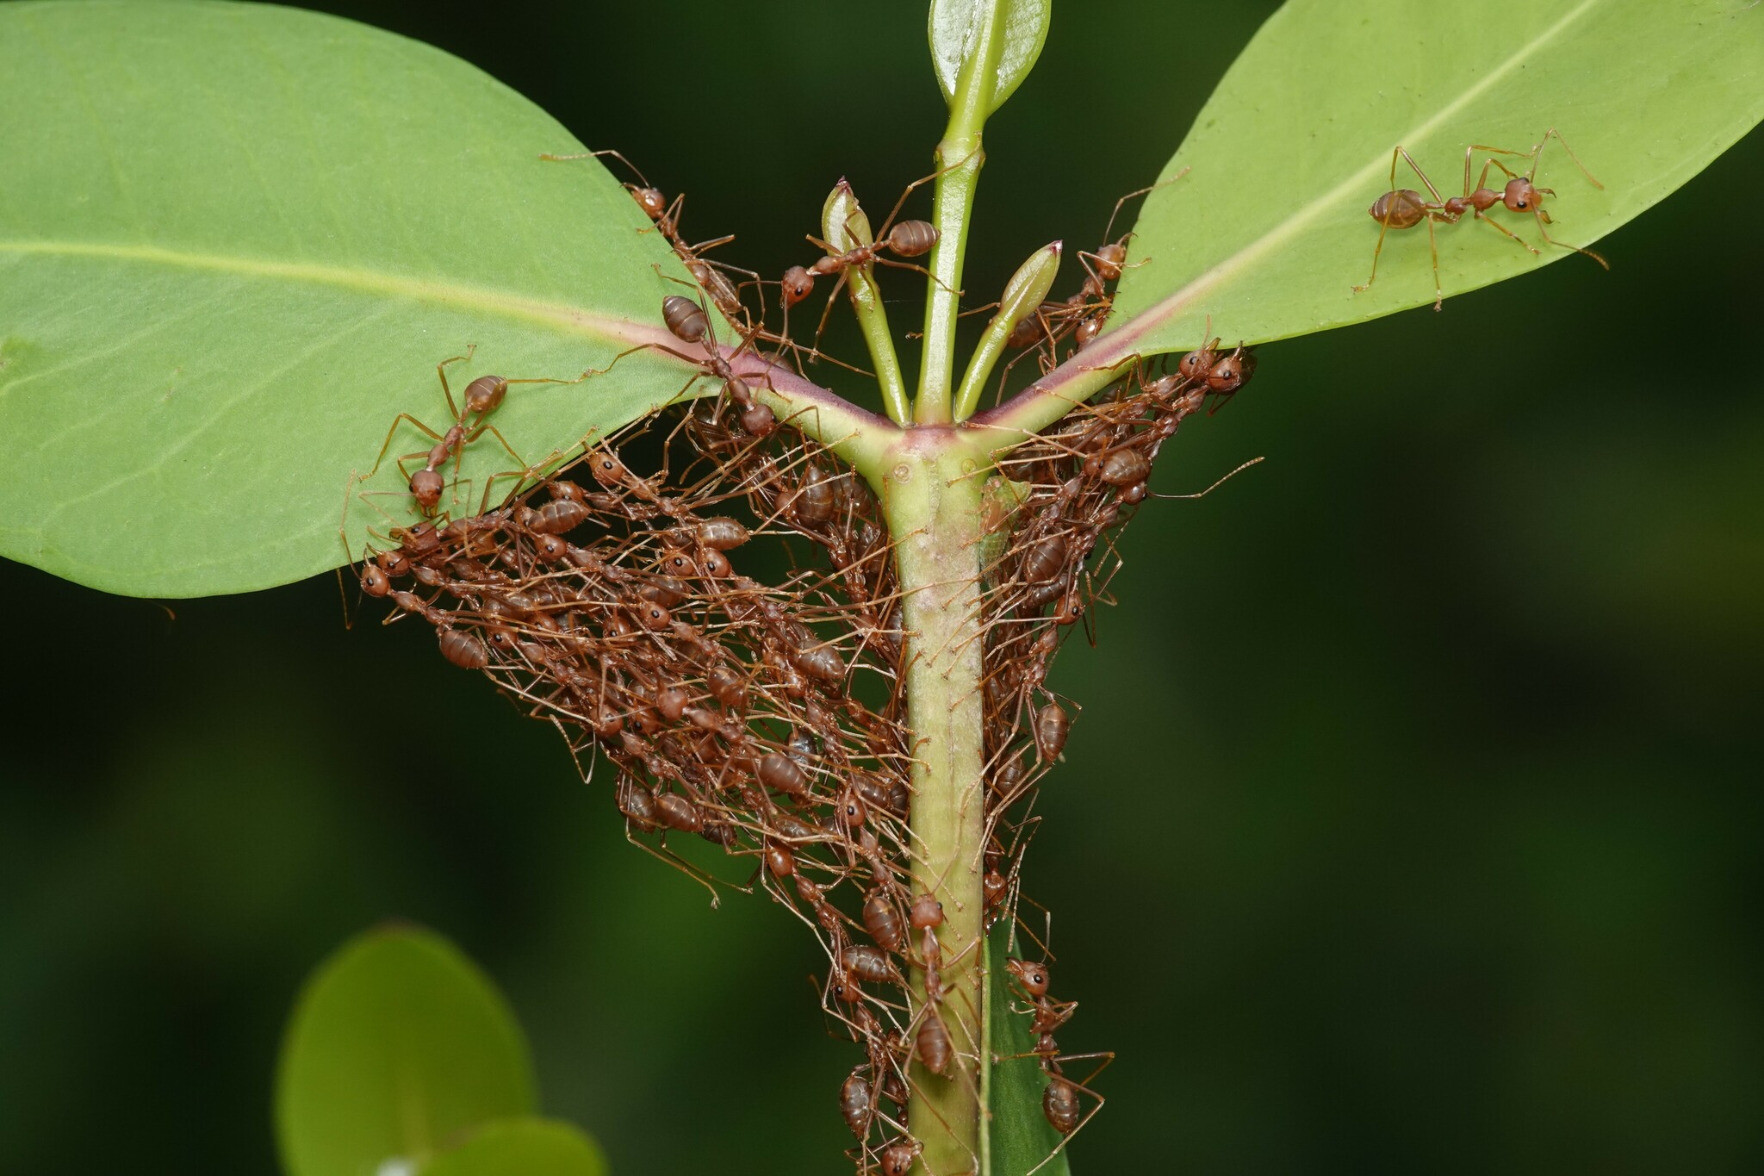 Reddish brown ants holding on to each other as they pull on leaves.